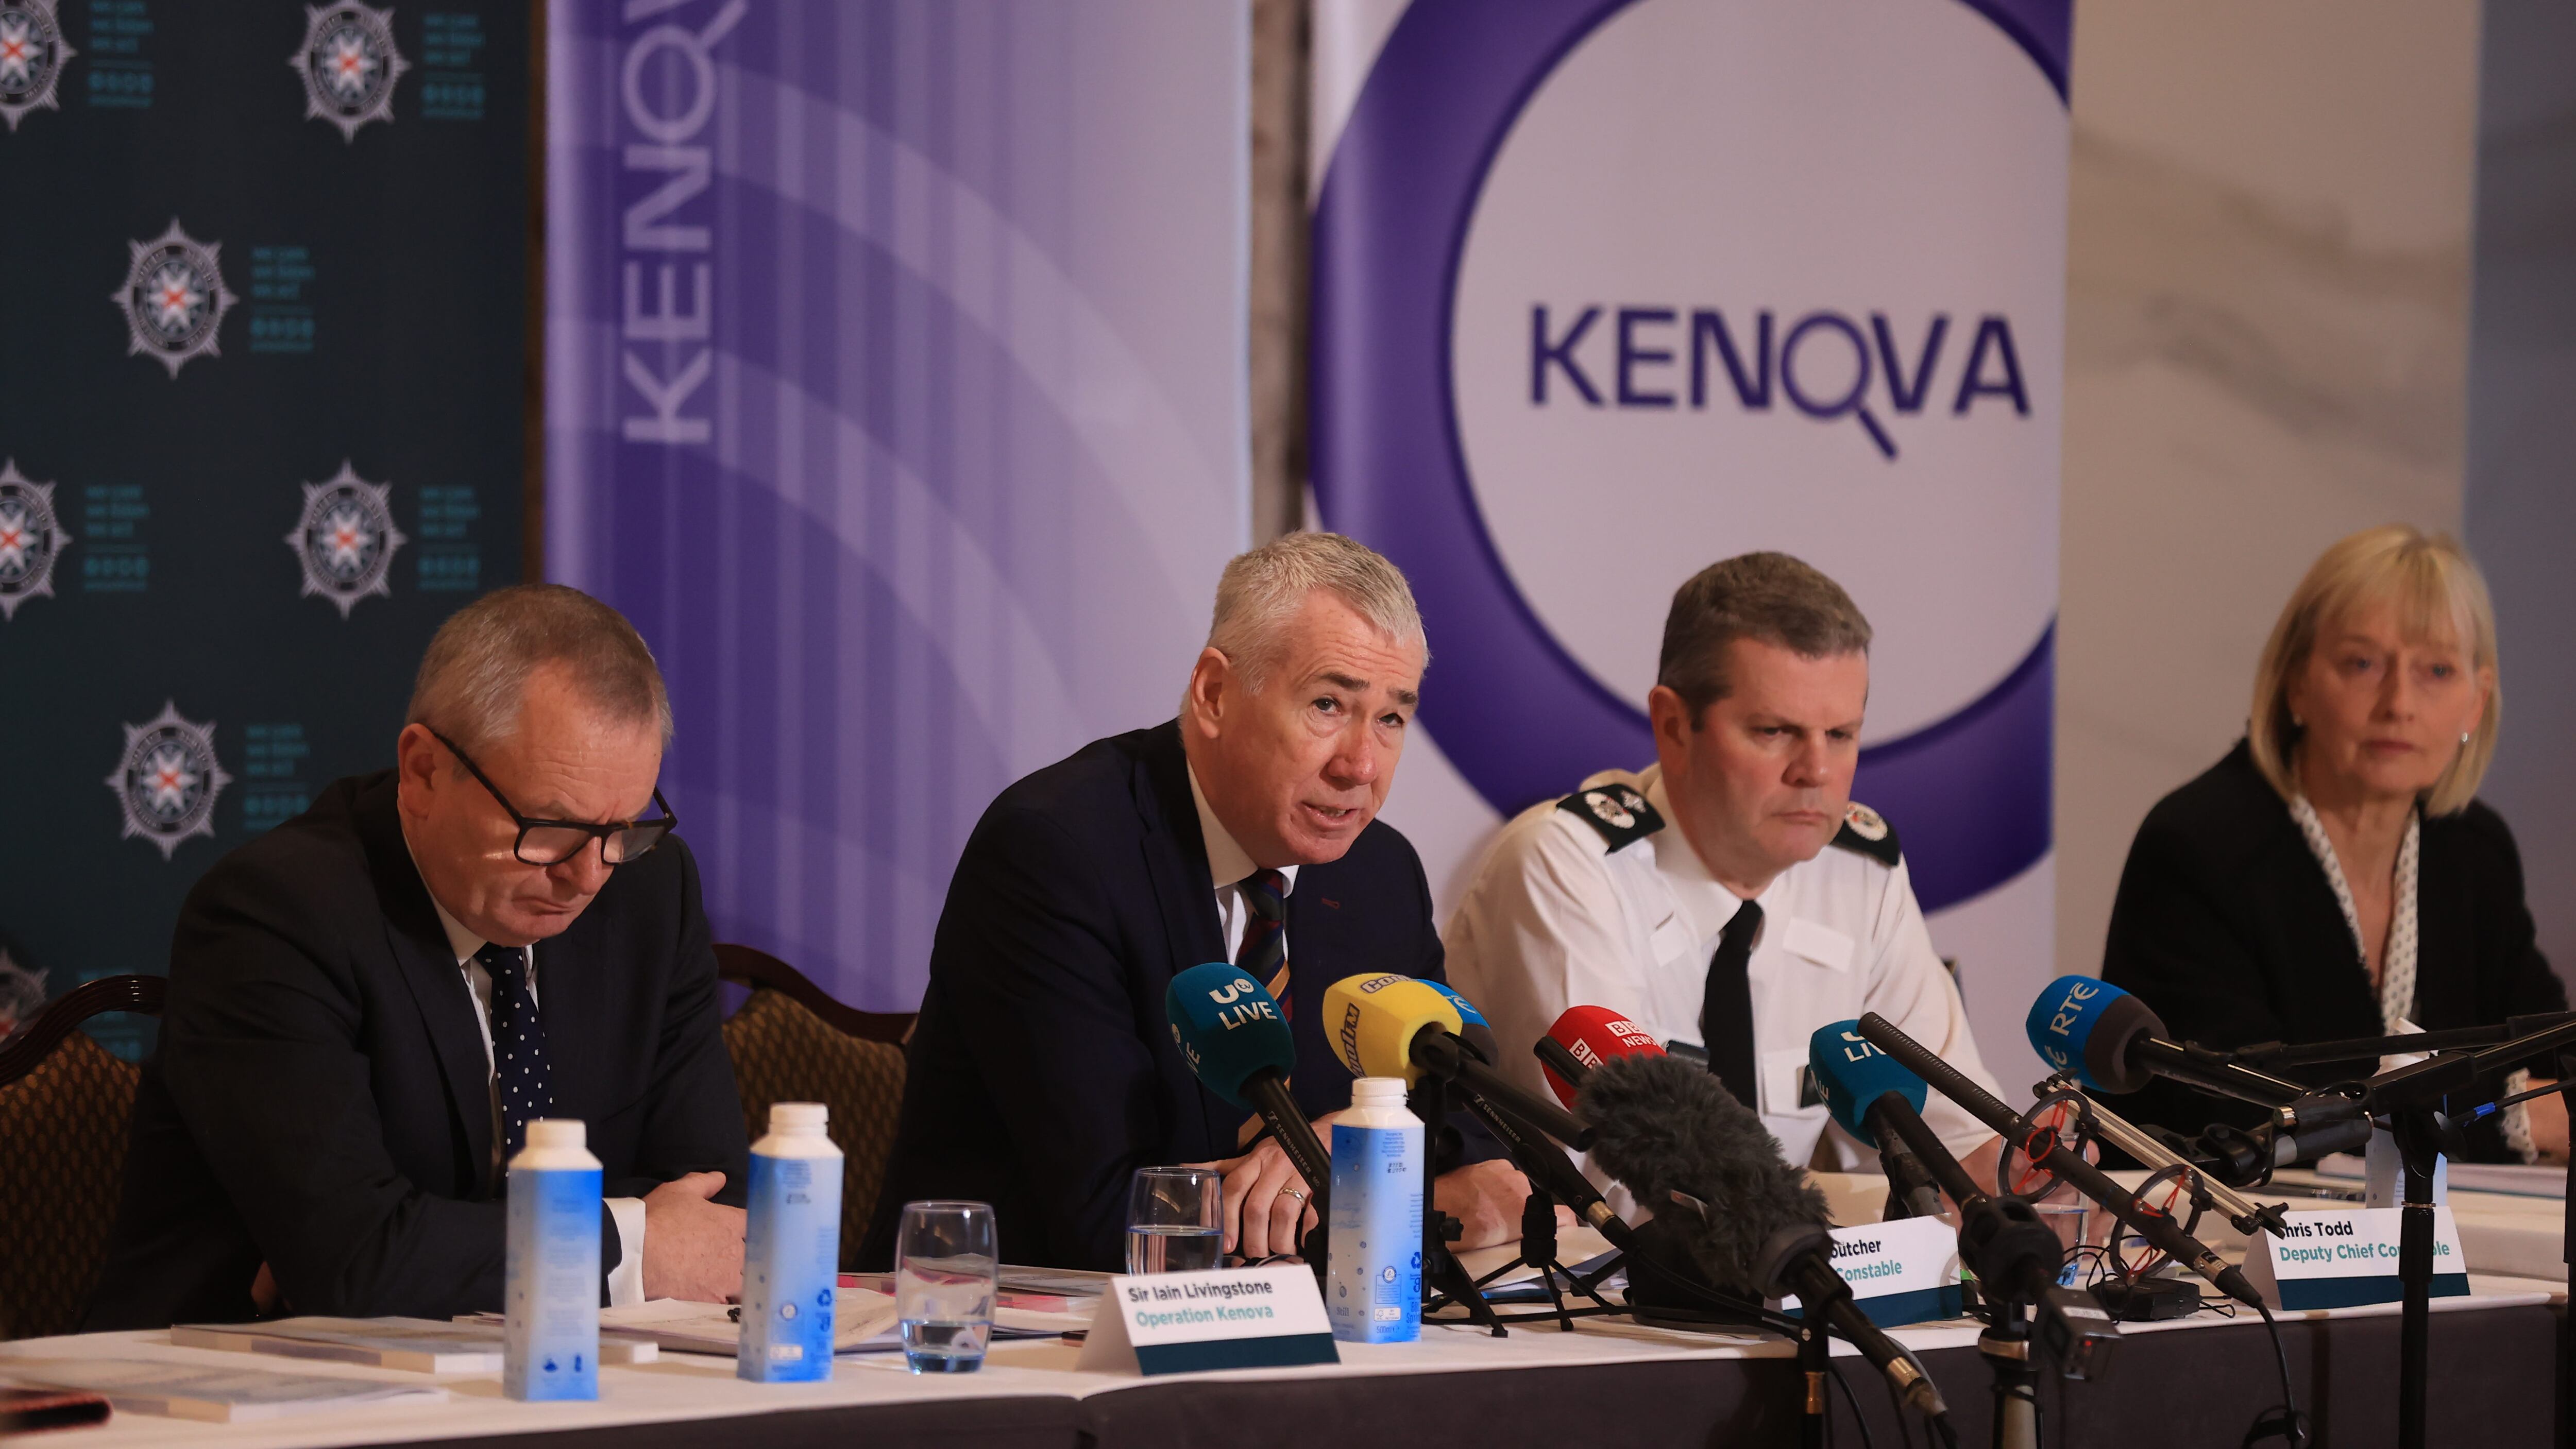 The interim findings of the Operation Kenova report were published on Friday